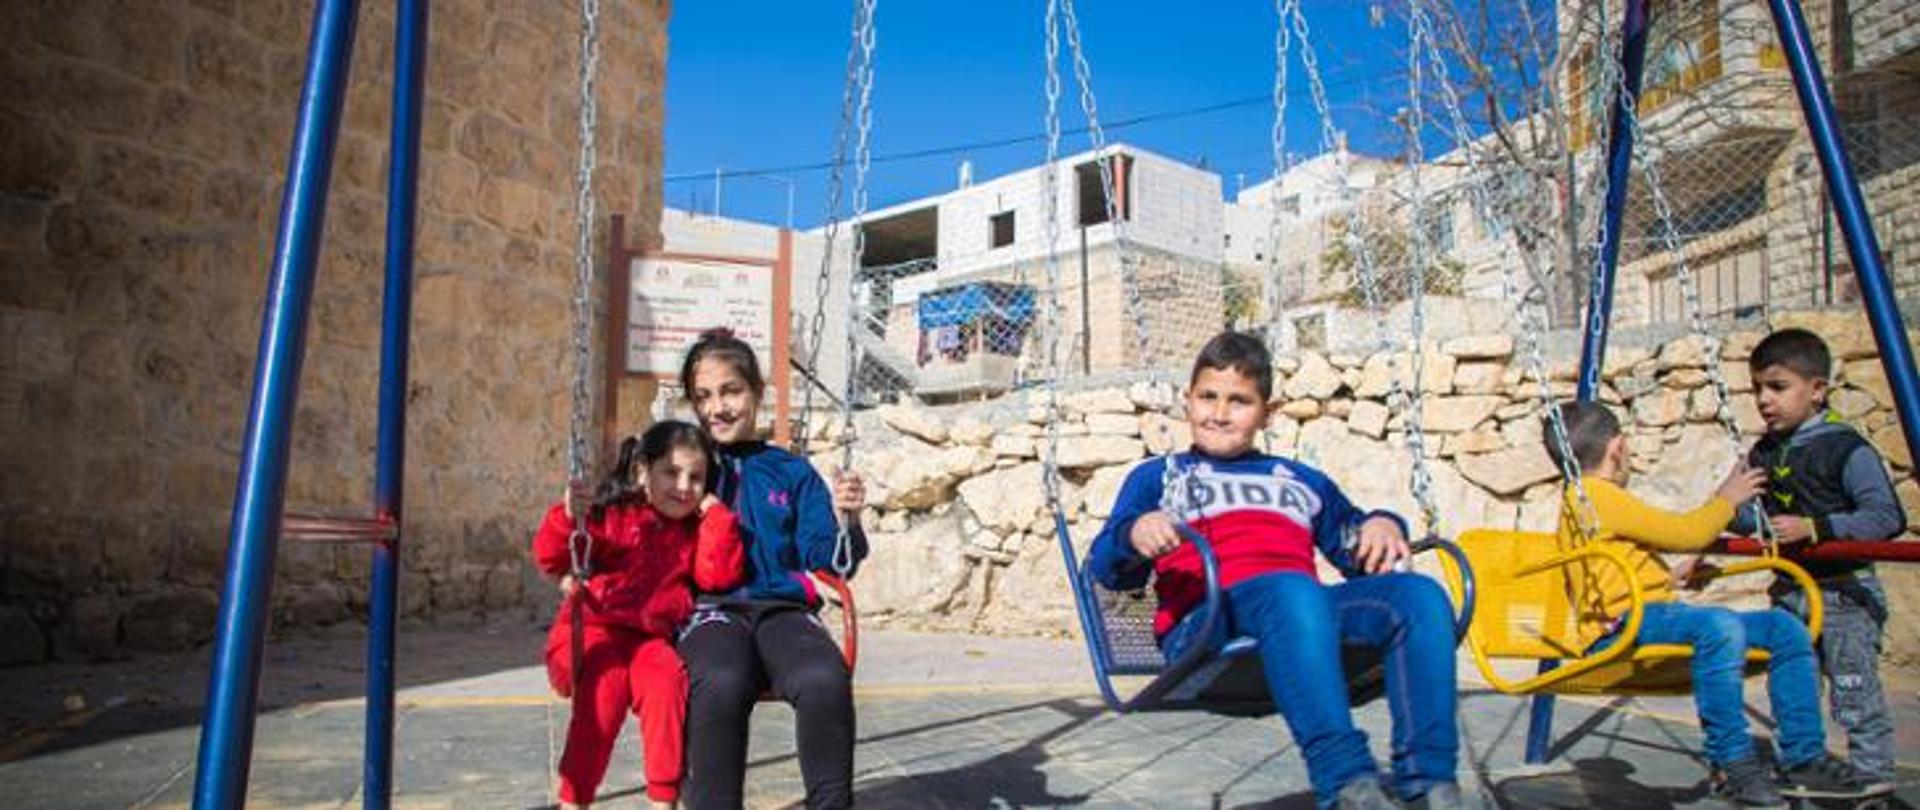 Improving access to services of after-school education and safe playground for children in Old City Hebron
